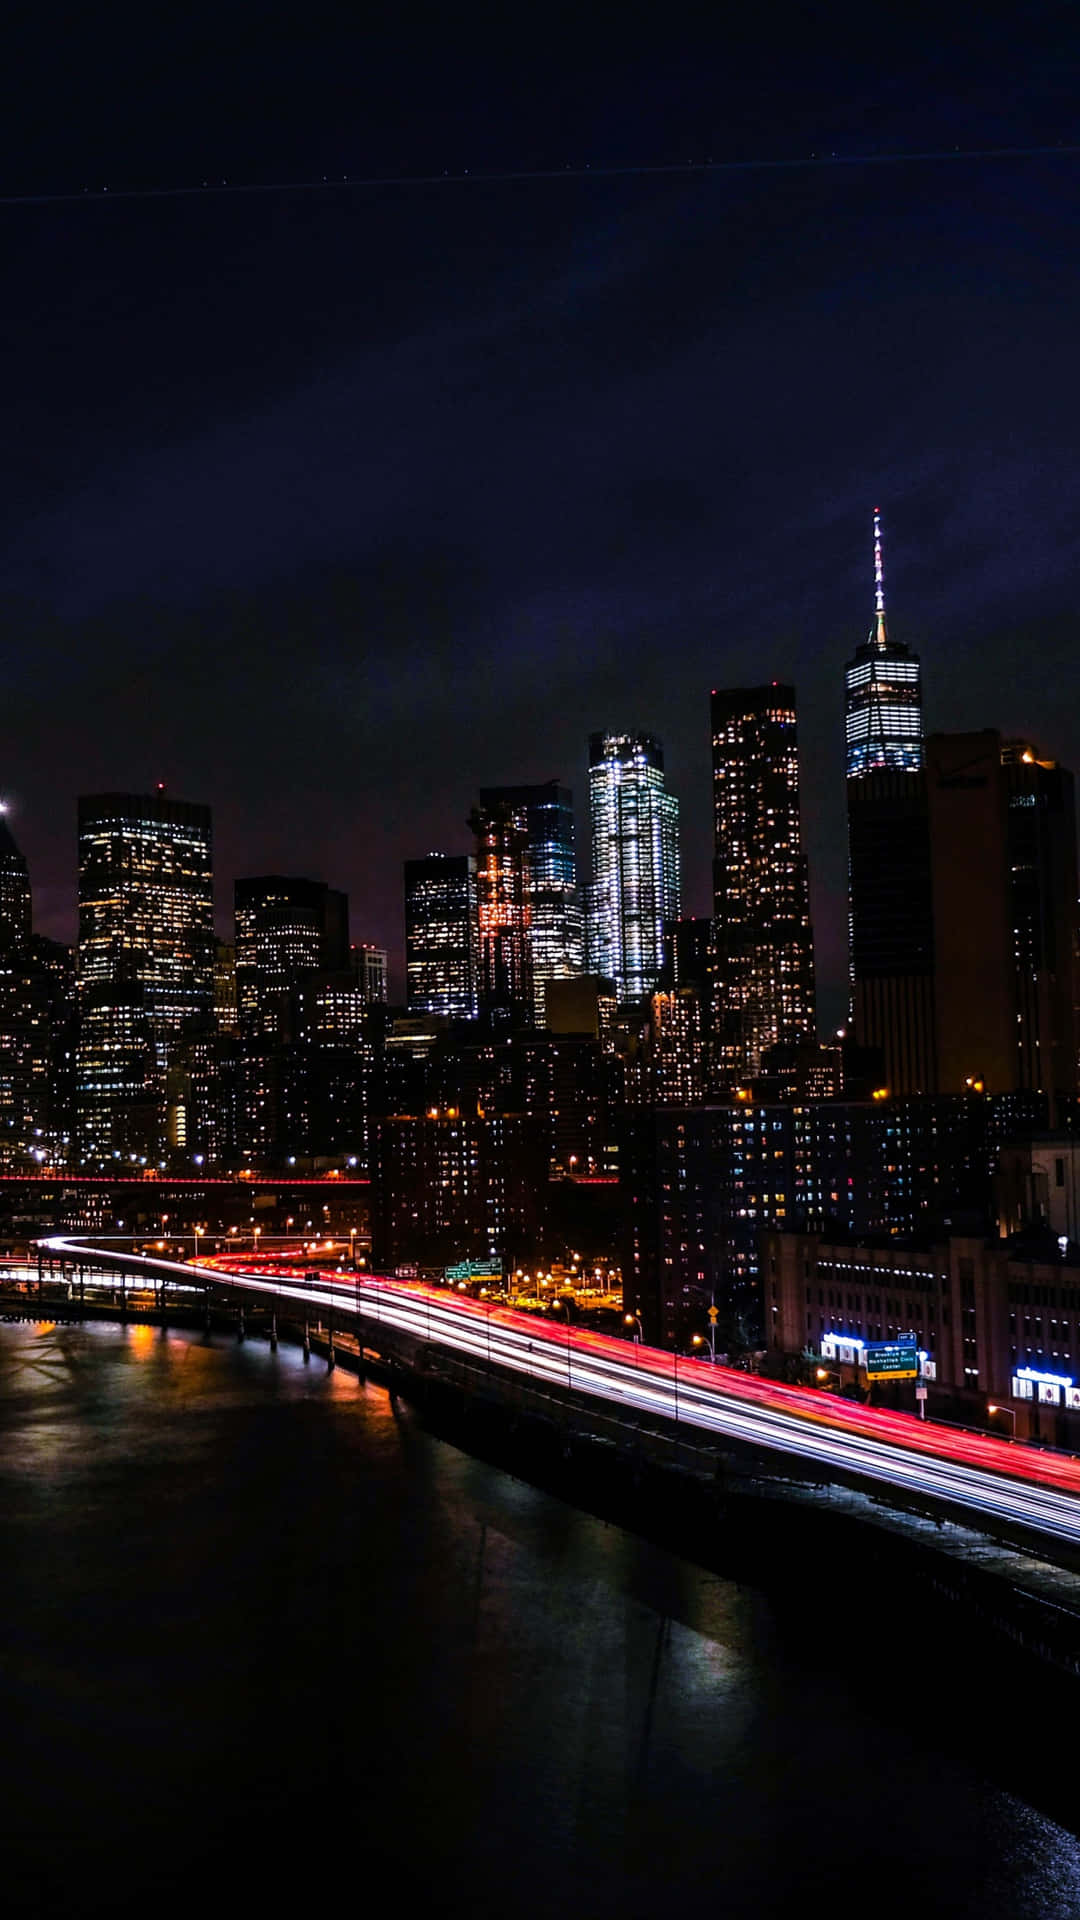 Experience the magic of NYC at nighttime with this New York City Night Iphone Wallpaper